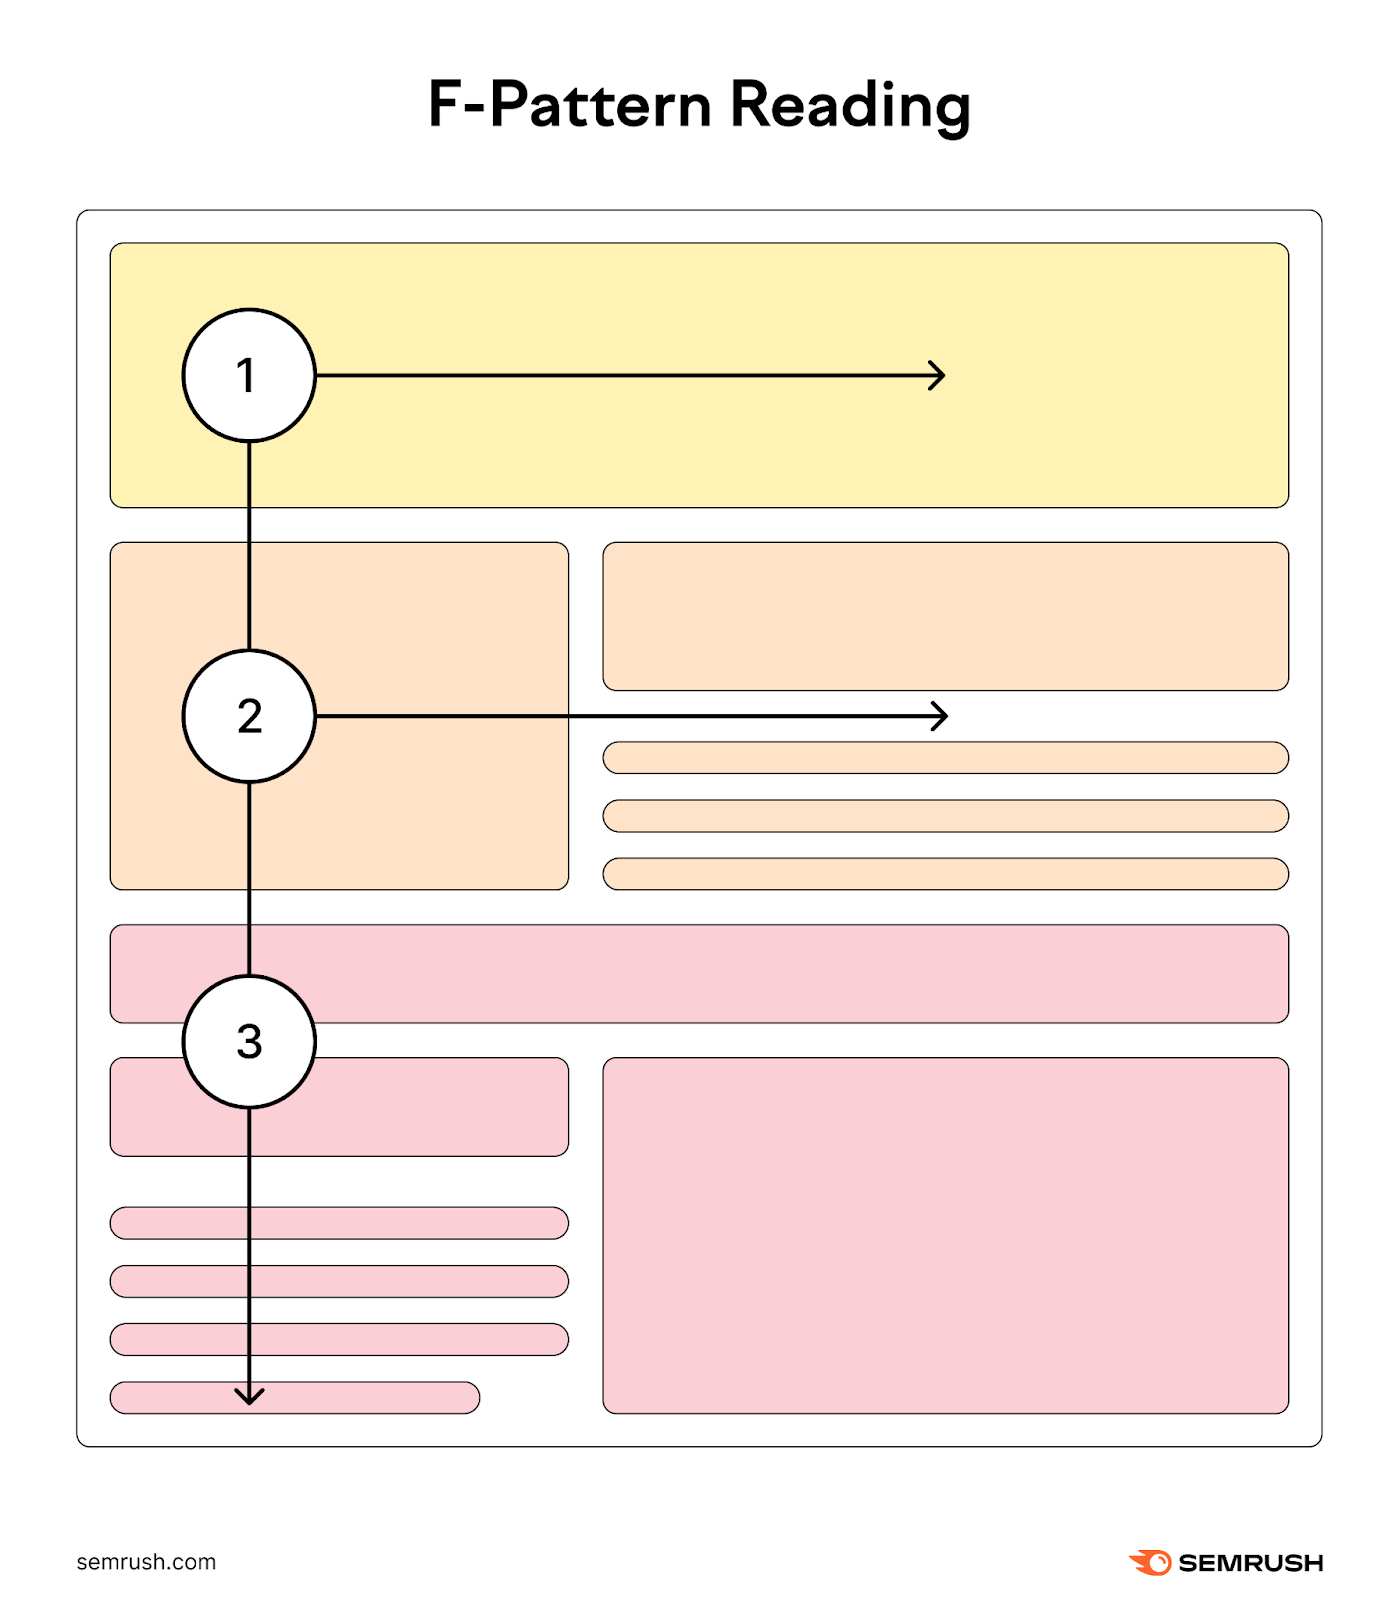 An infographic by Semrush demonstrating F-pattern reading